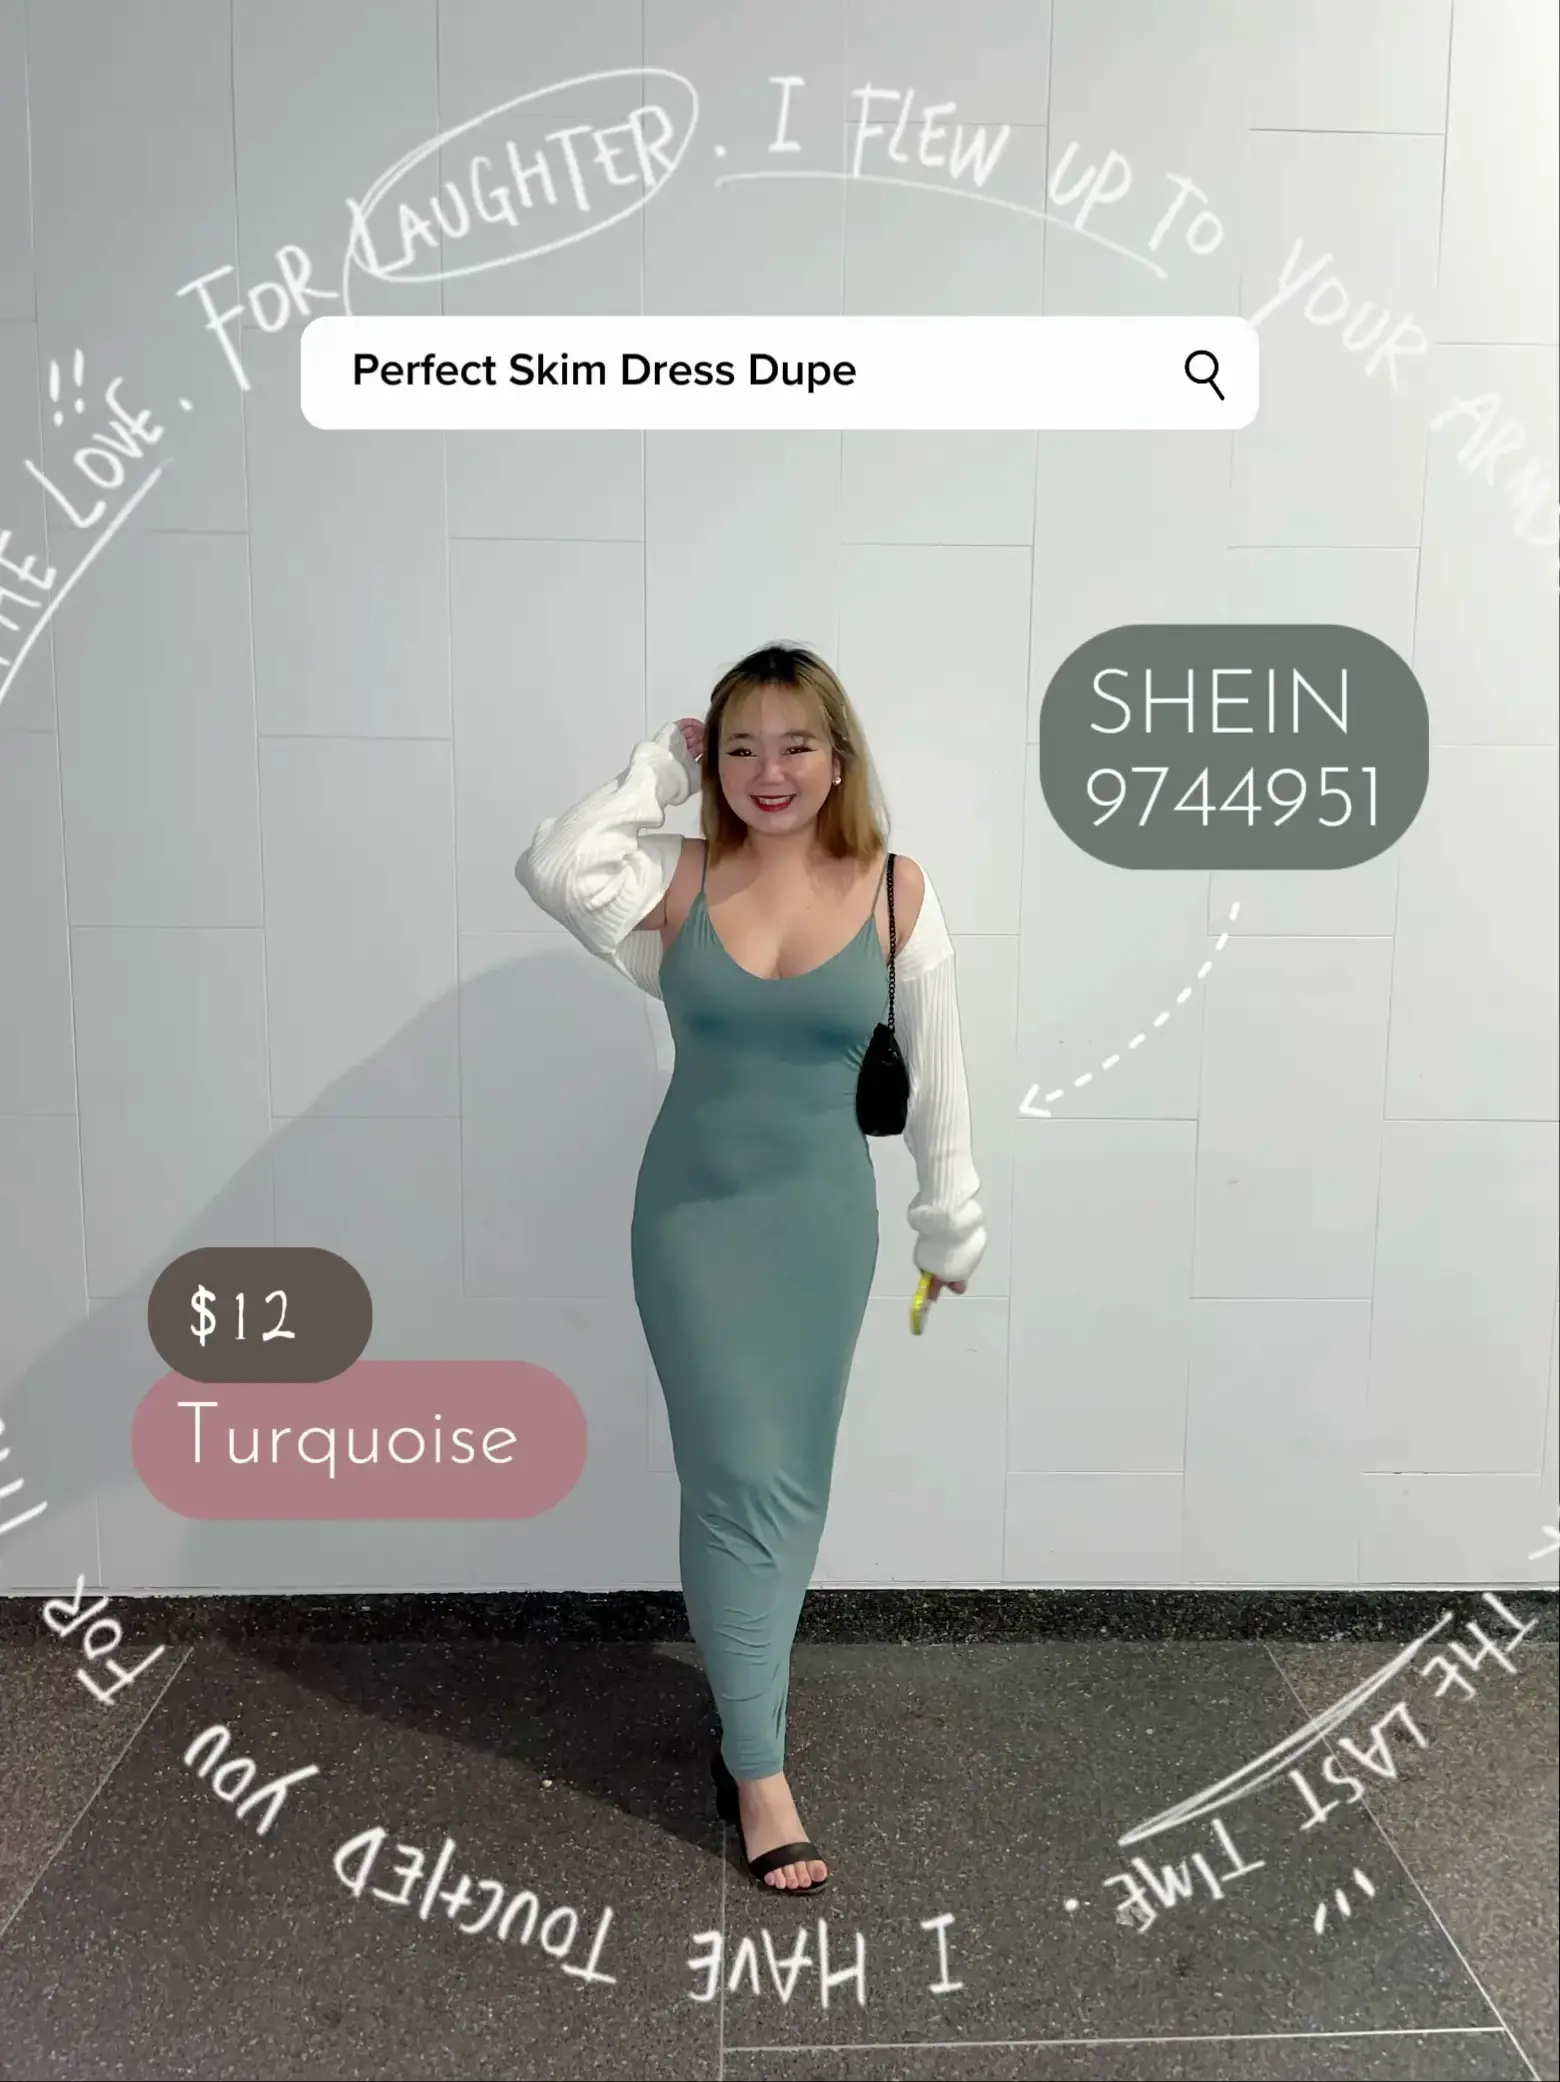 I'm a fashion expert - I found the best SKIMS dress dupe which